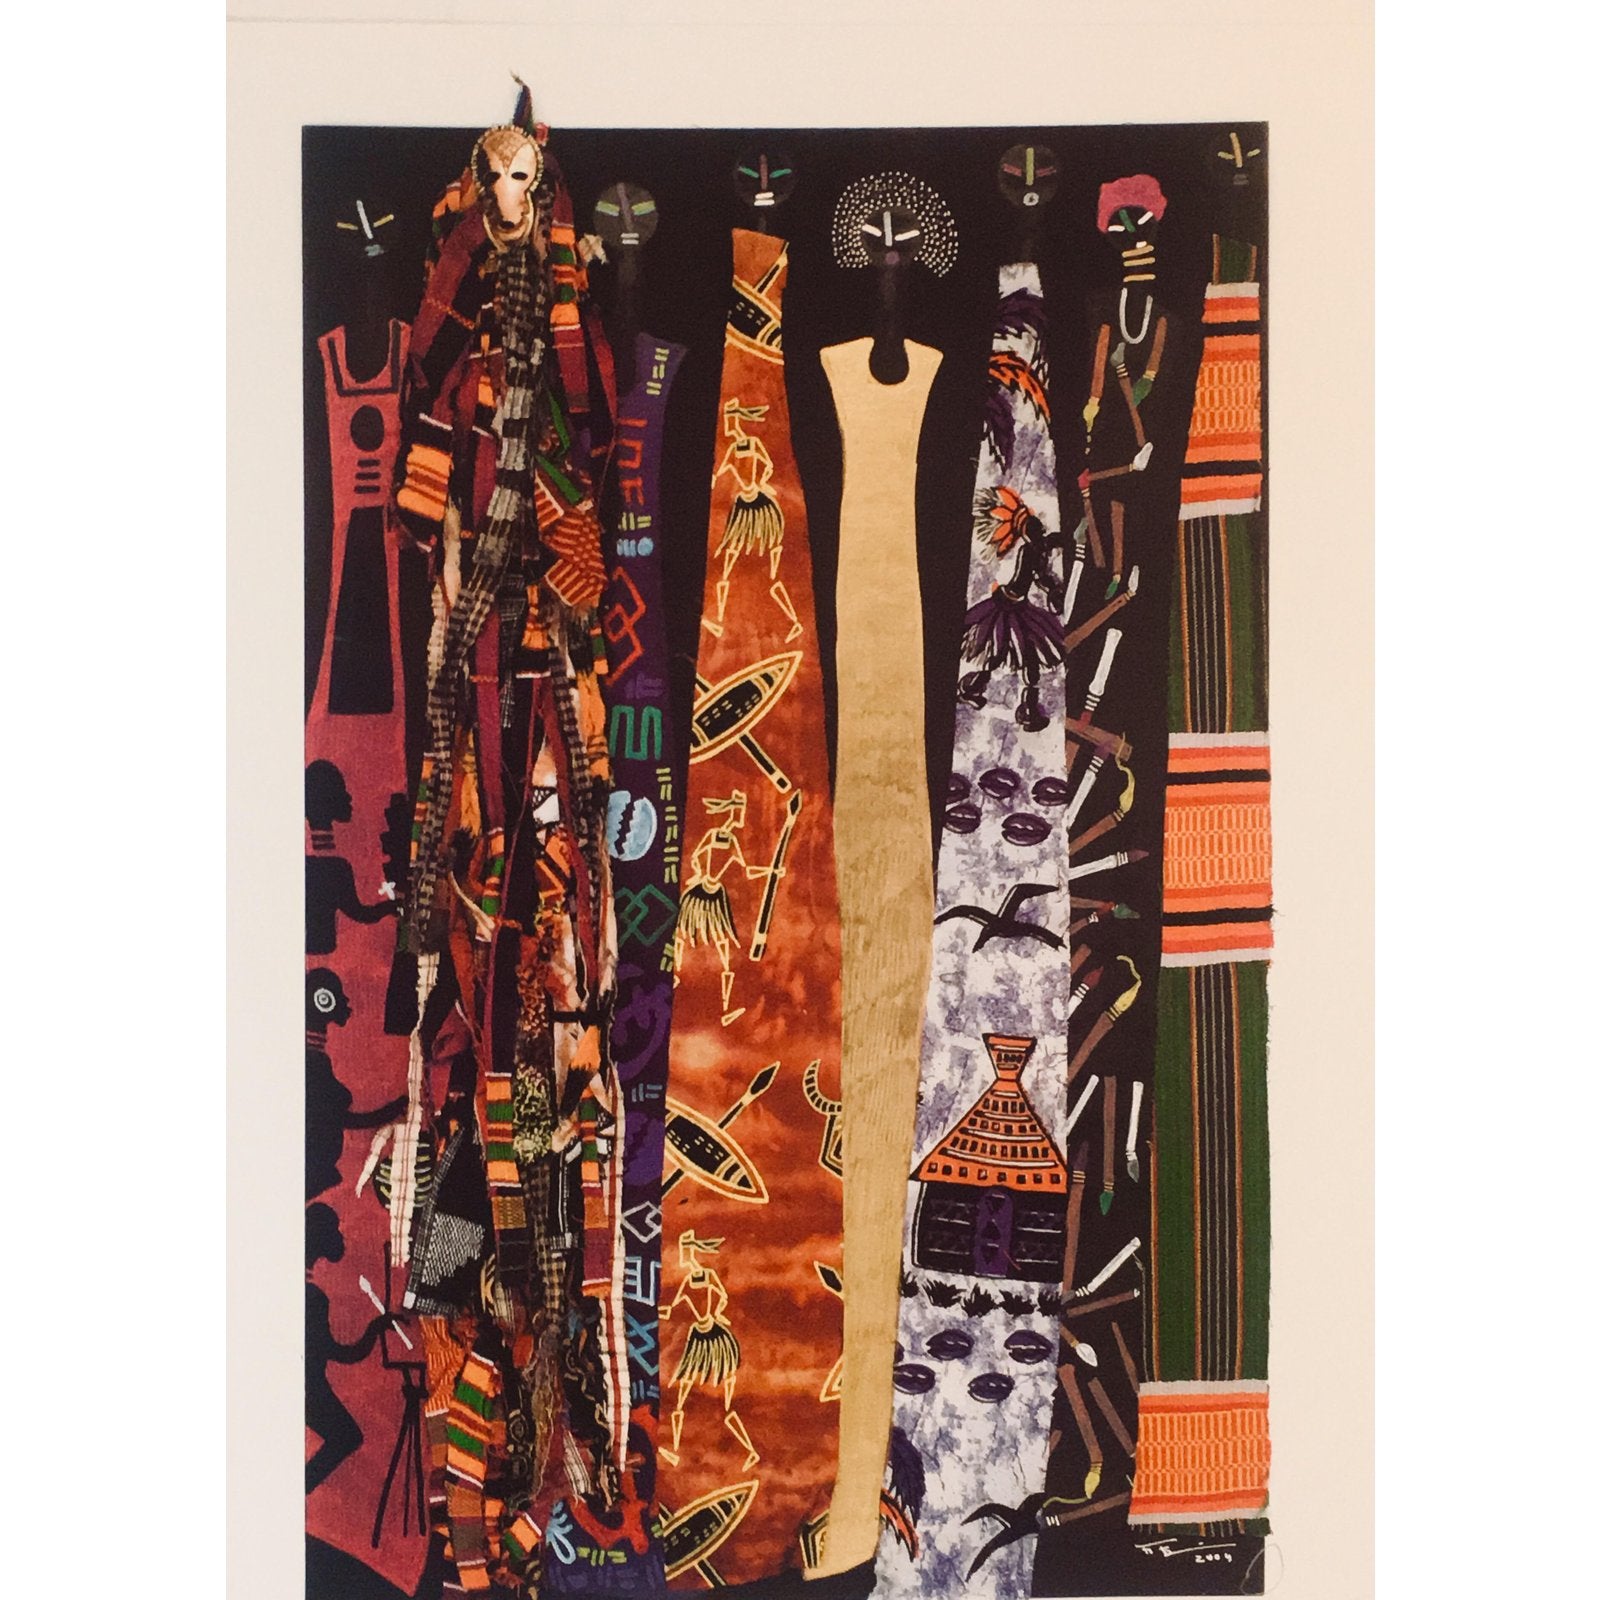 Modern African American Heritage Art Show “Rites of Passage” Poster Print by Frank Frazier ABBY ESSIE